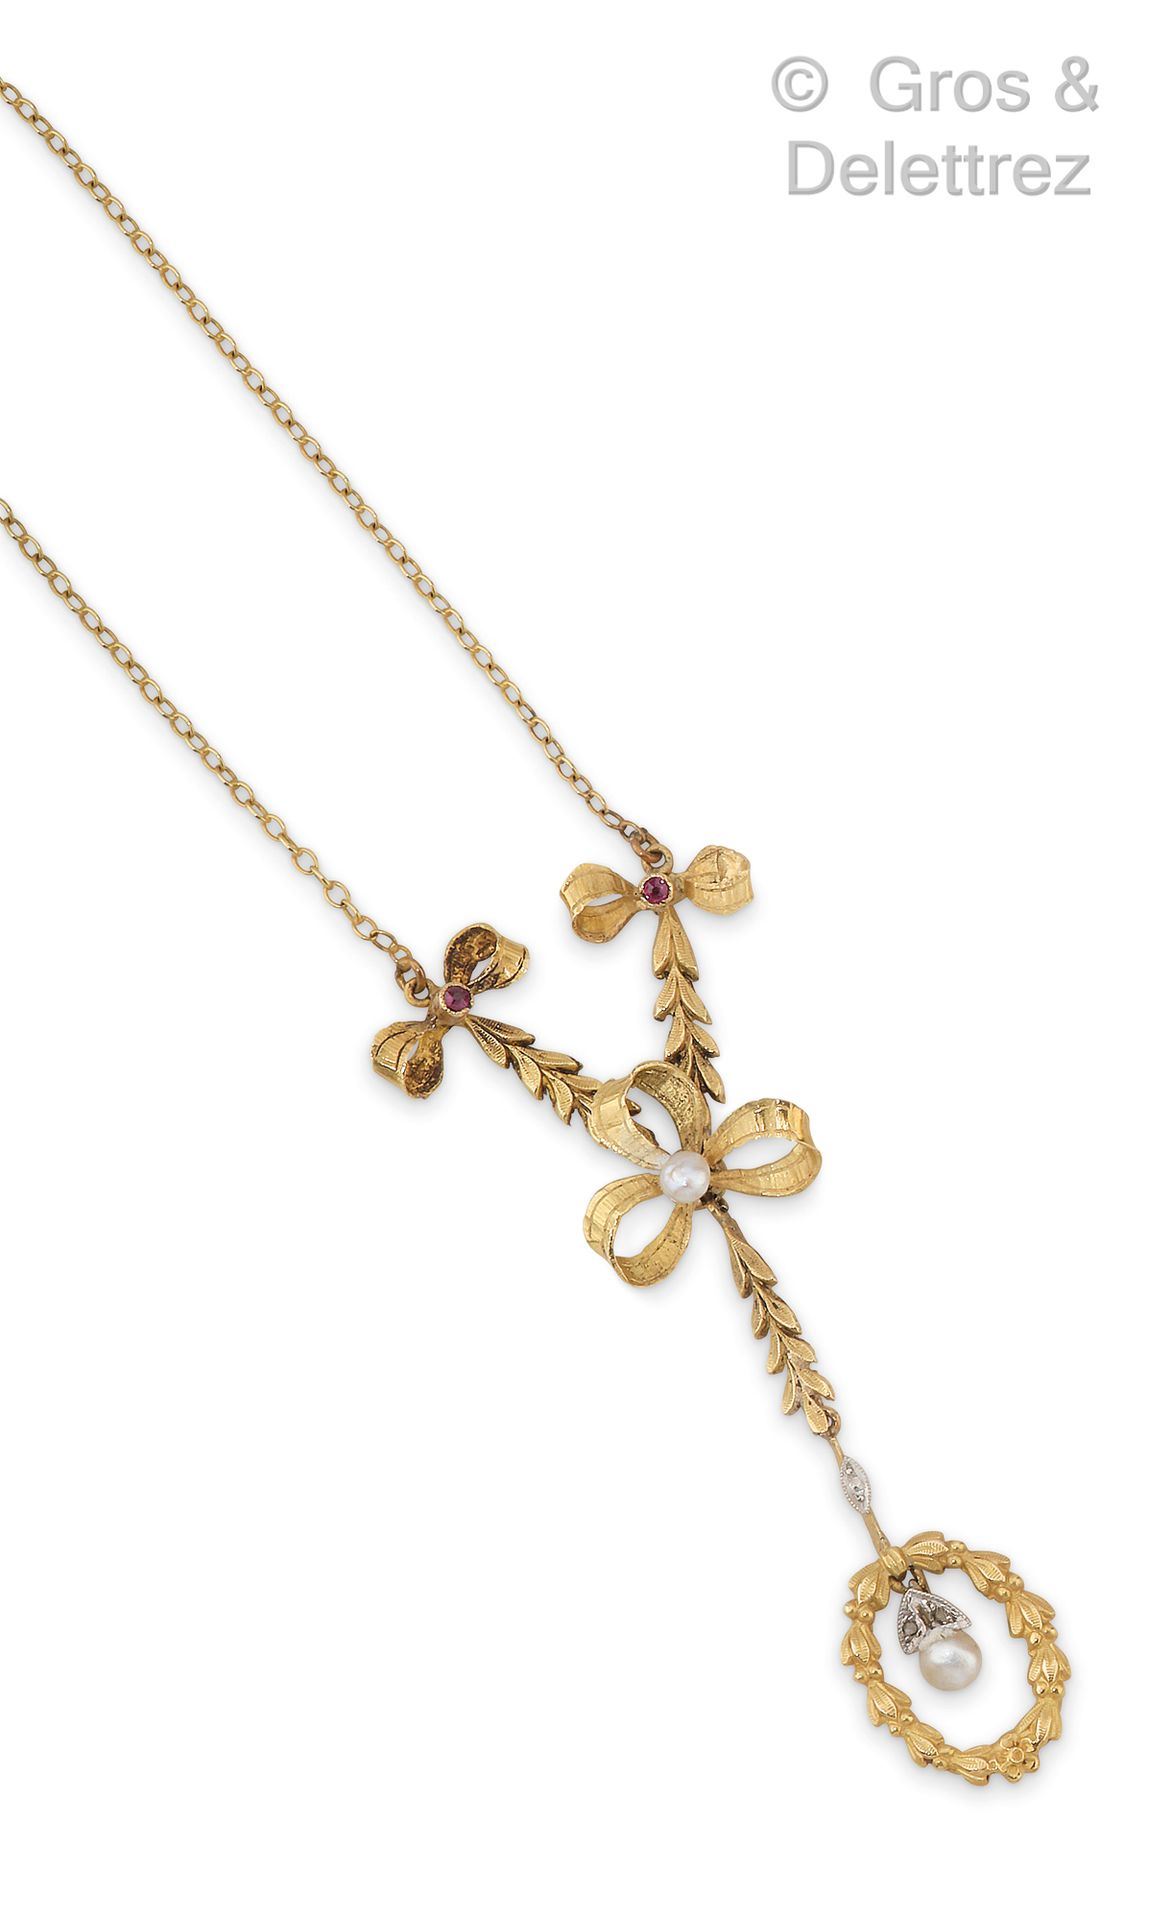 Null Pendant necklace in yellow gold, decorated with a crown of foliage and bows&hellip;